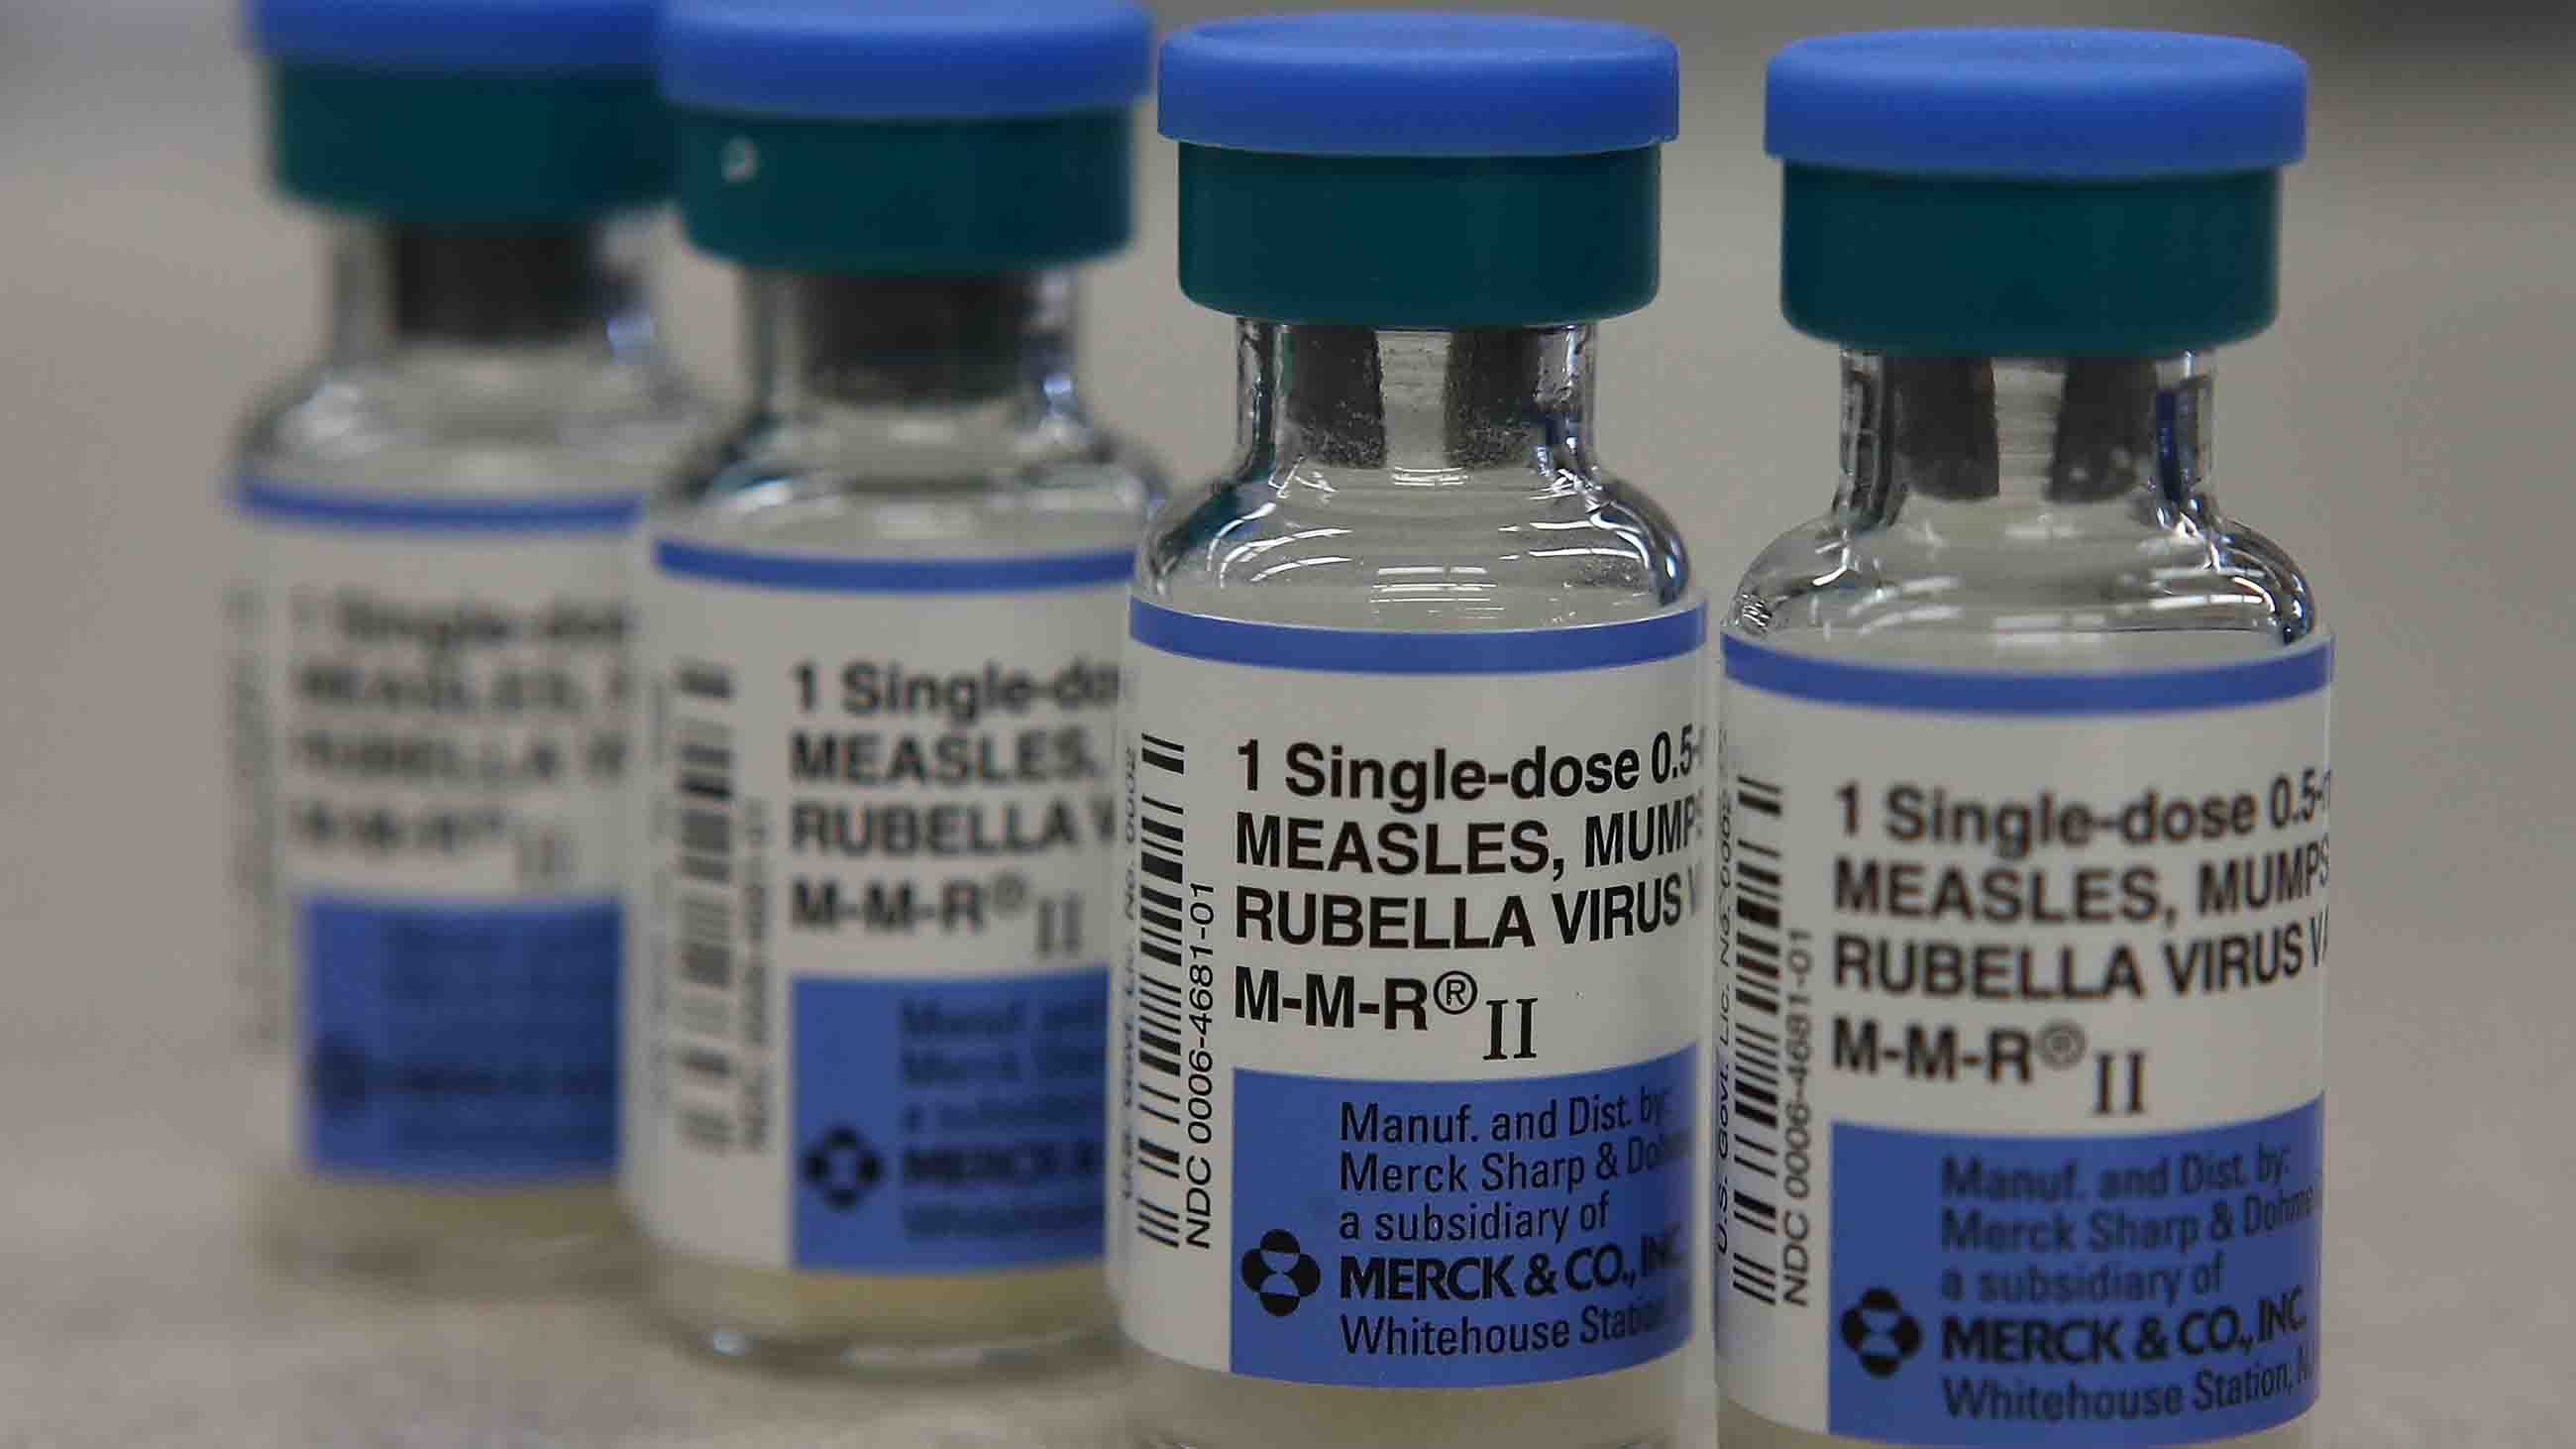 At least 32 of those infected with measles in the Pacific Northwest had not been vaccinated against the disease.